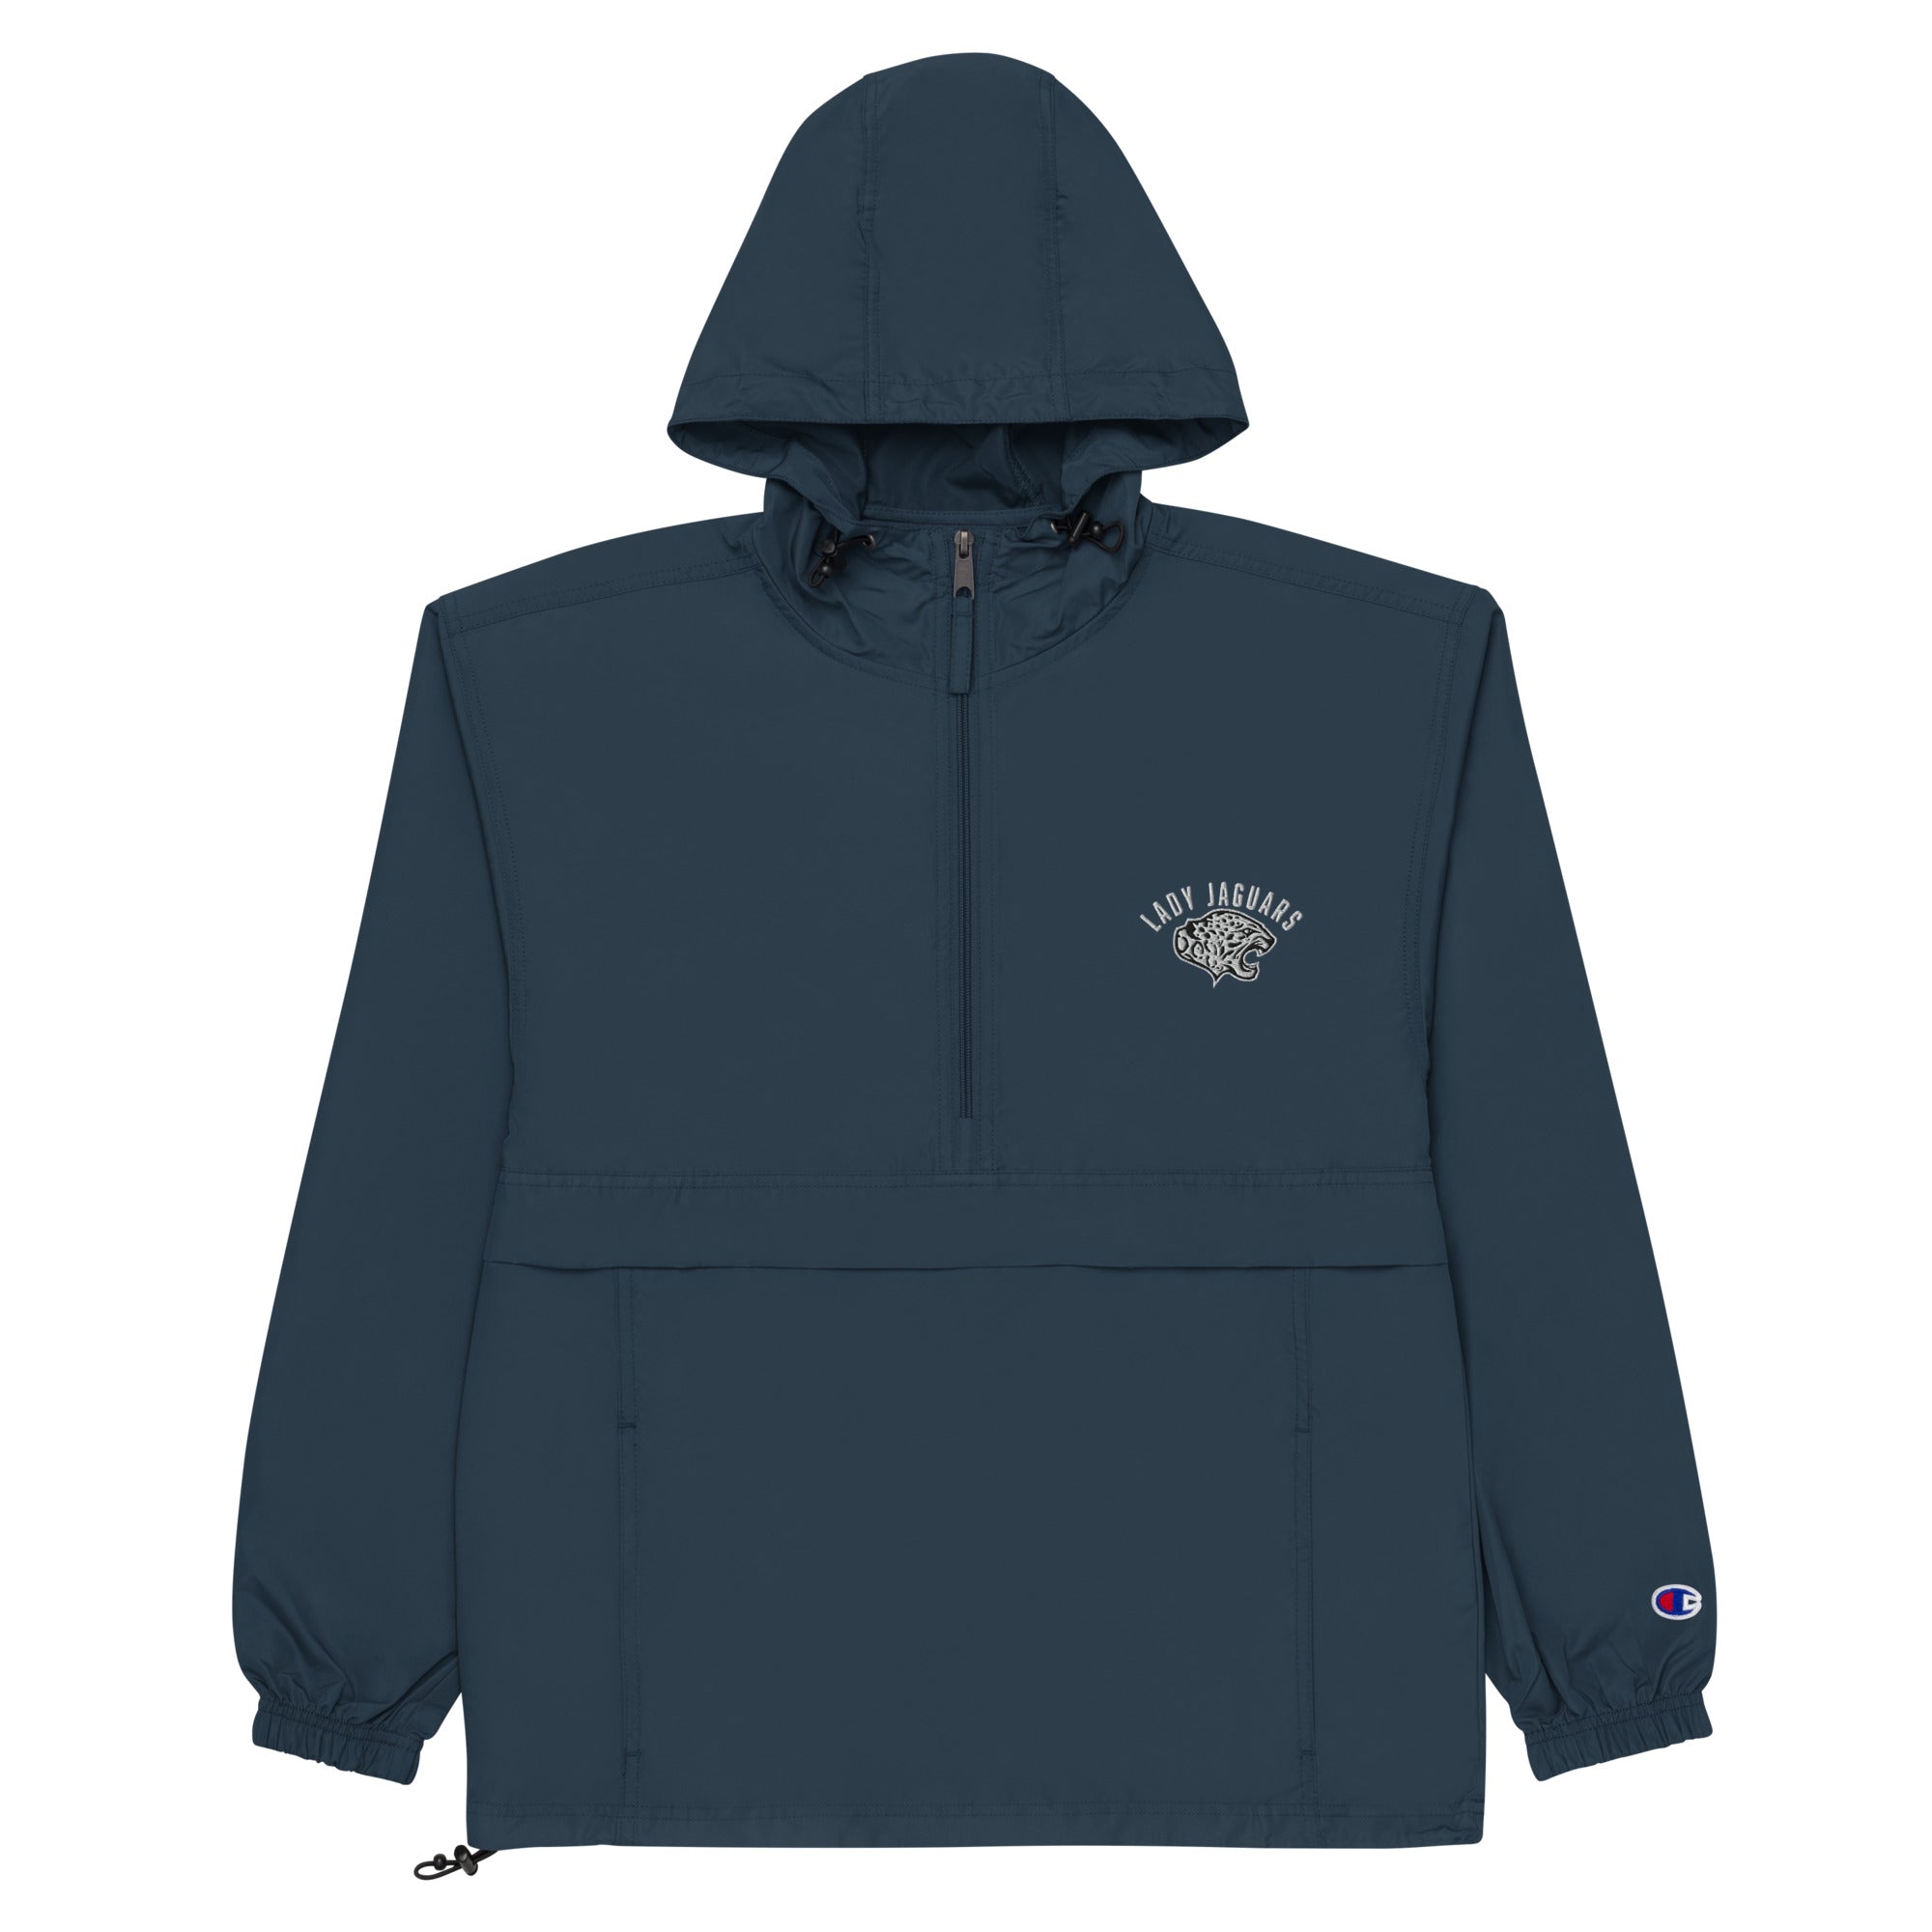 Mill Valley Lady Jaguars Embroidered Champion Packable Jacket